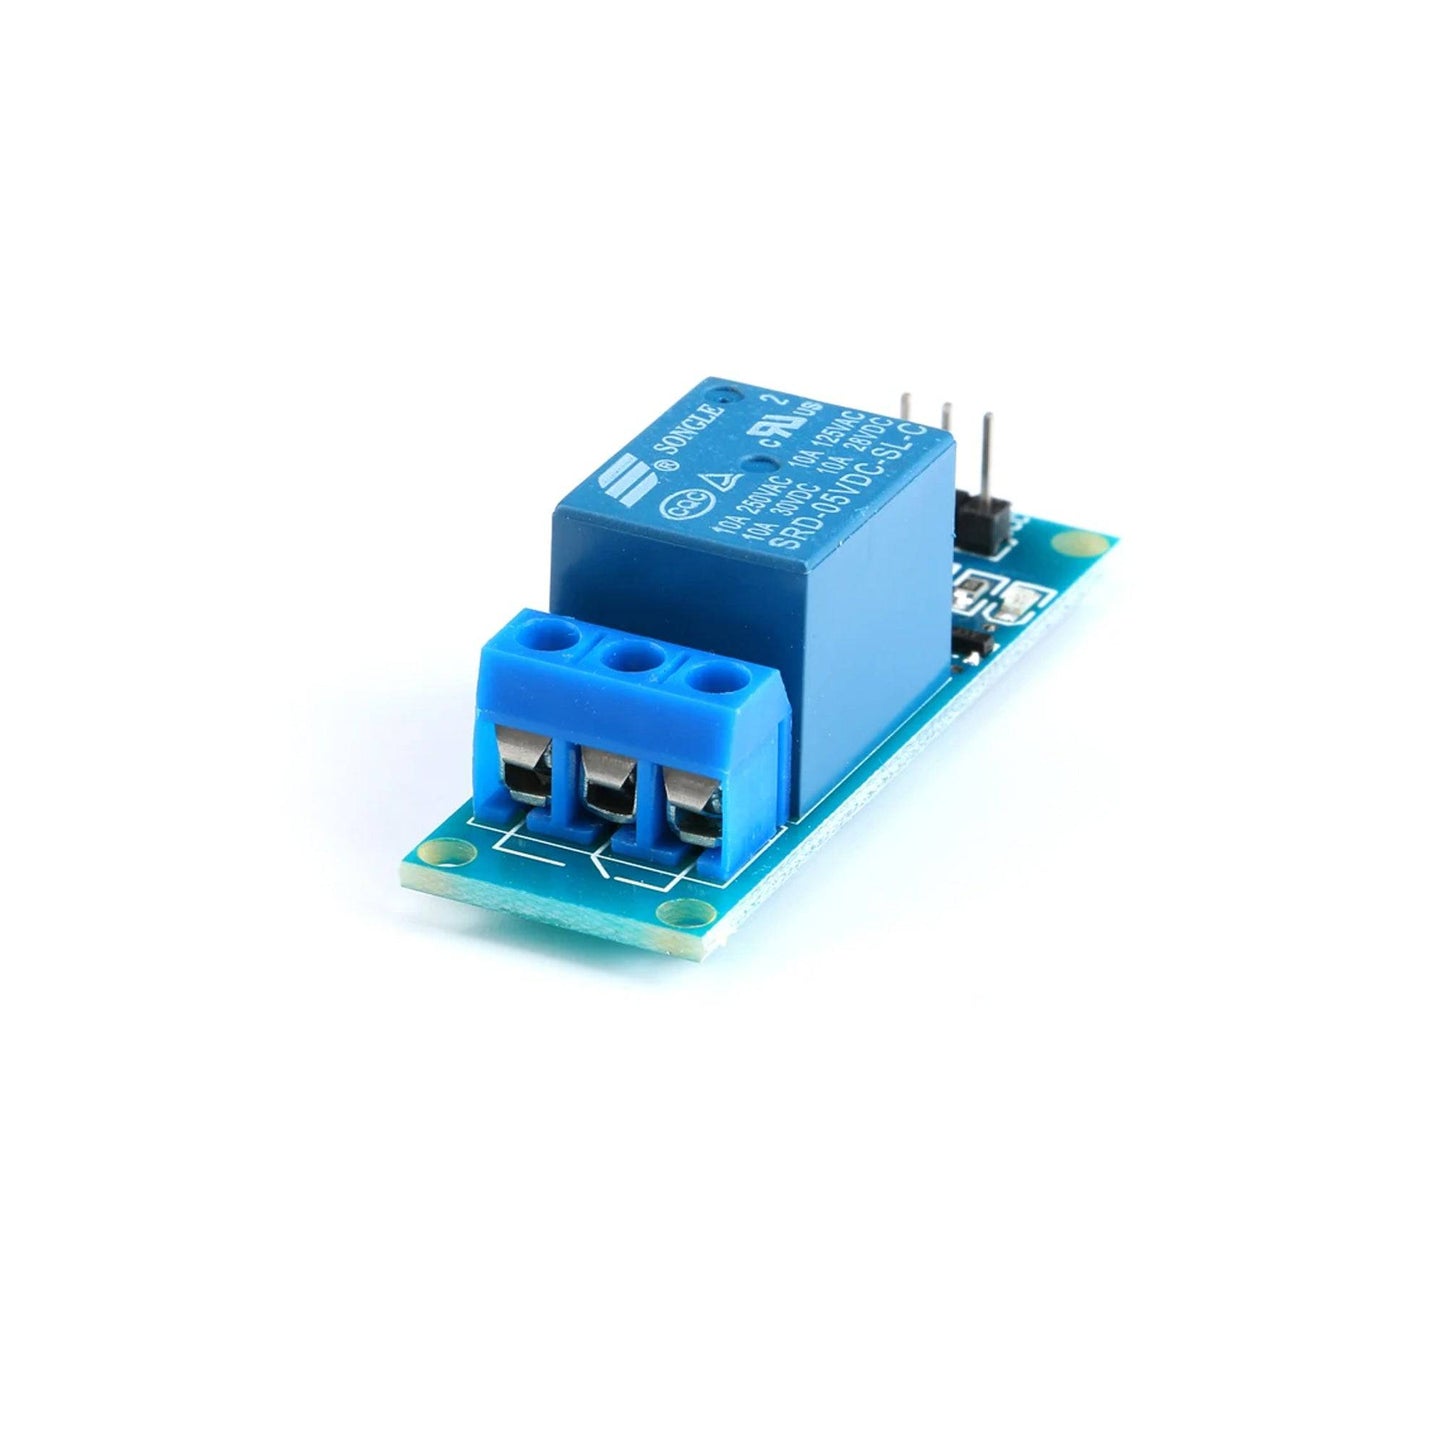 5V 1 Channel Relay Module with Optocoupler